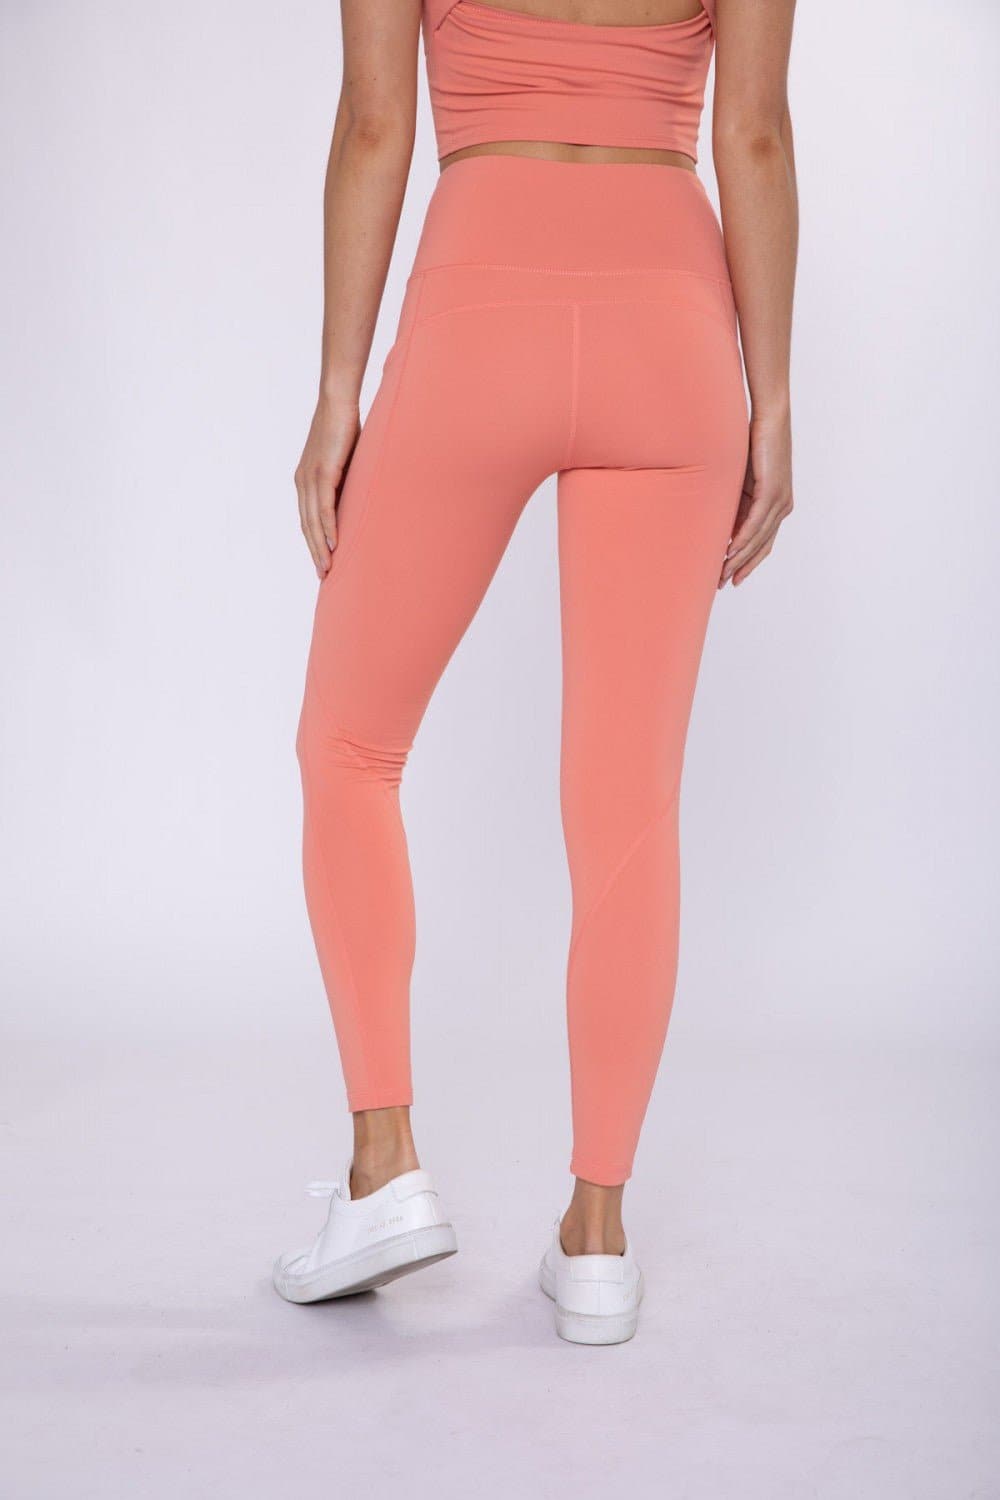 Essential Highwaist Leggings - Dusty Coral *Available in Curvy